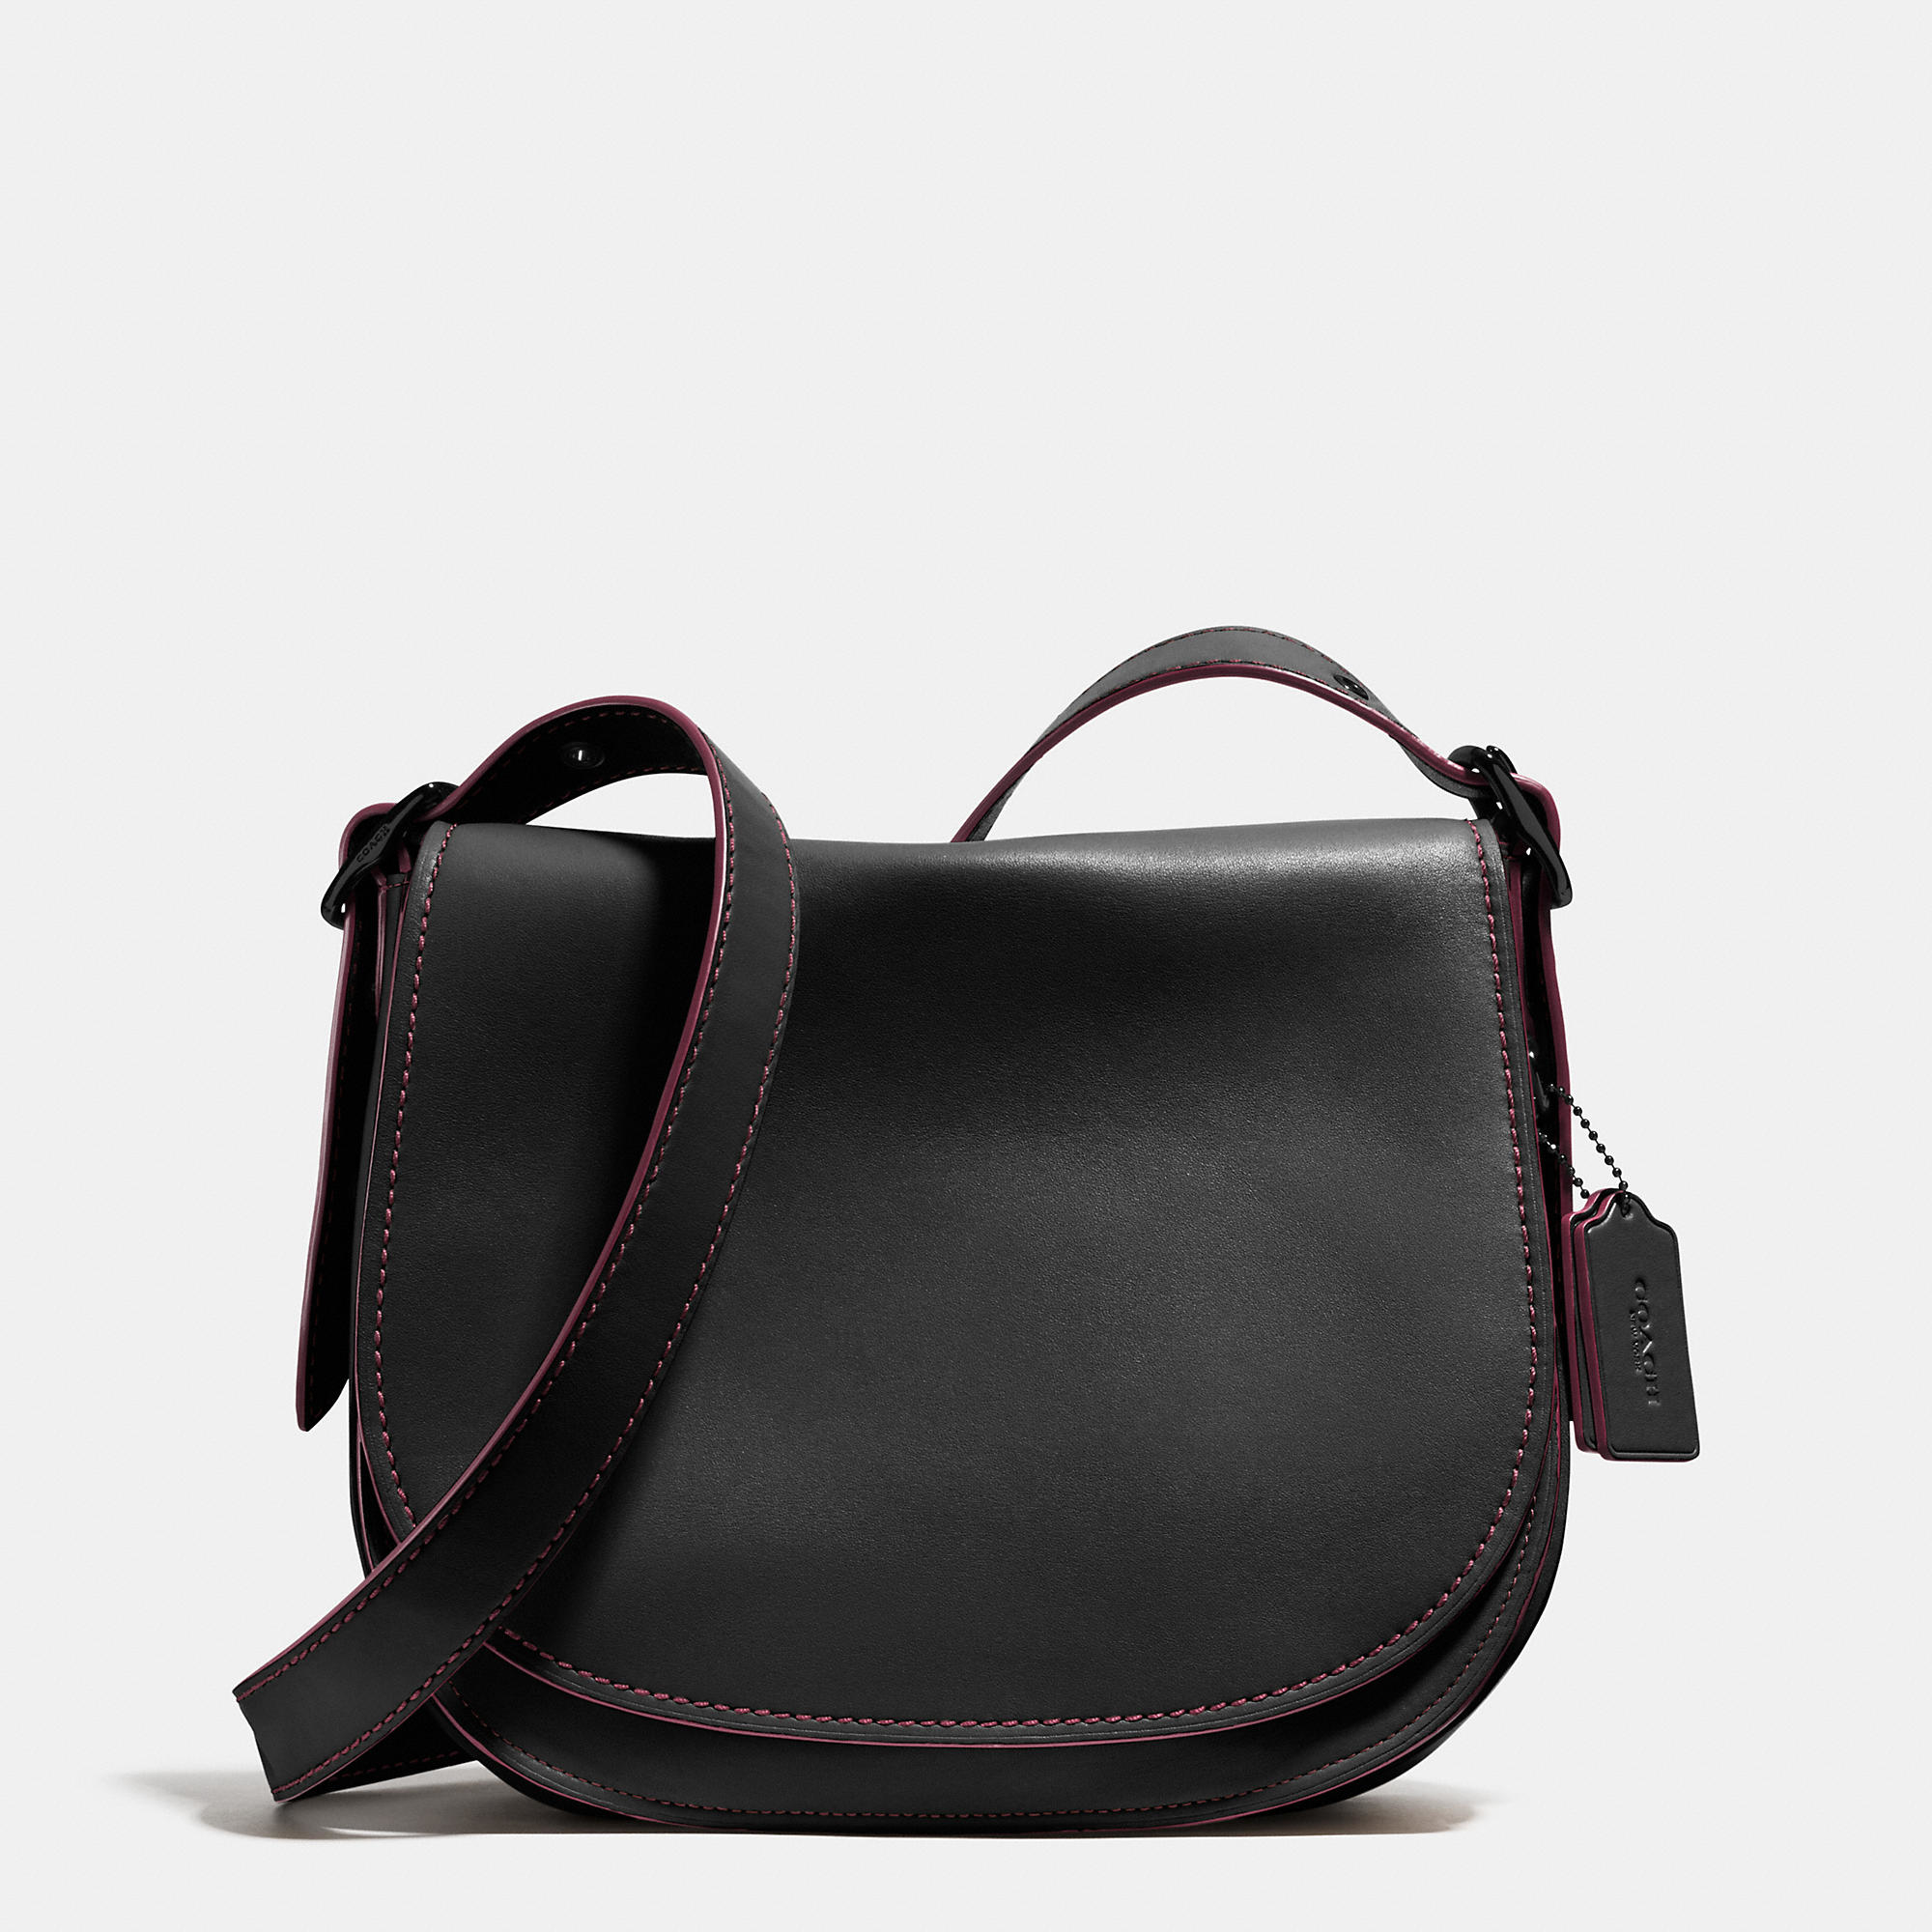 Lyst - Coach Saddle Bag In Glovetanned Leather in Black